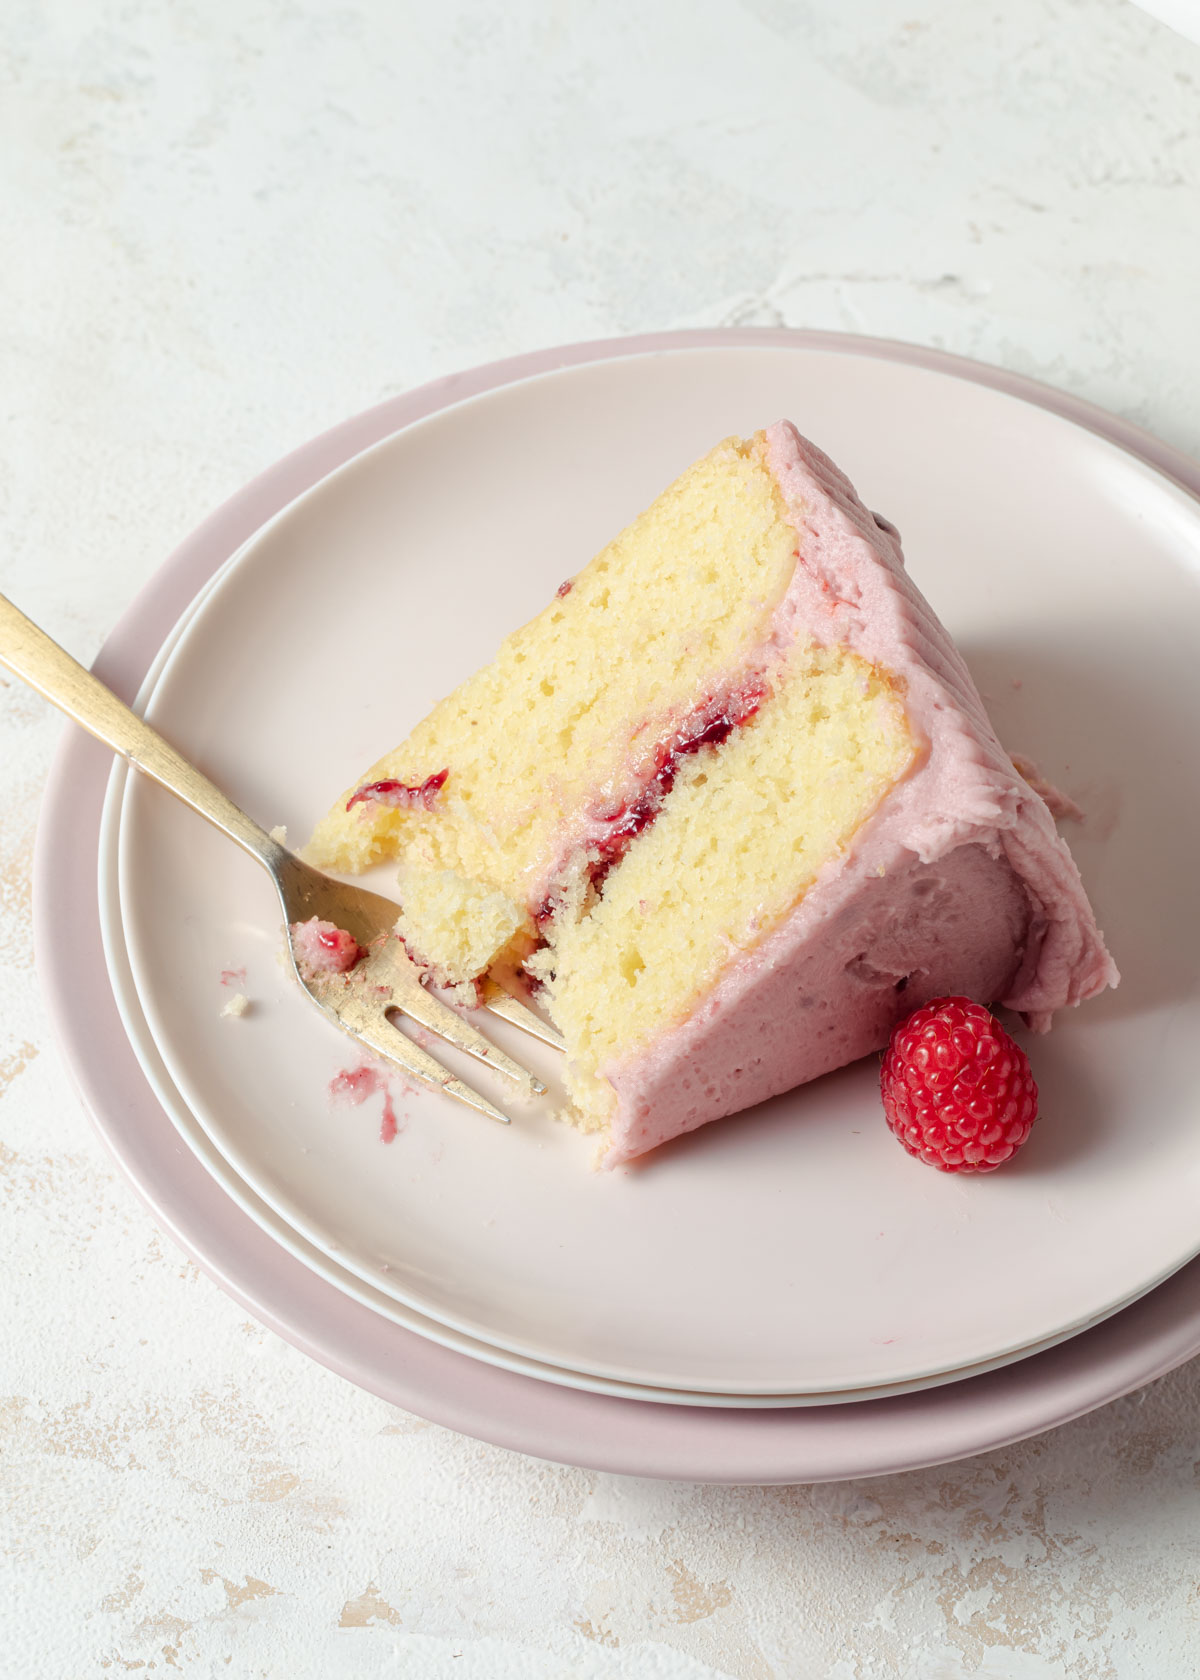 A slice of almond layer cake with raspberry filling and frosting set on a pale pink plate.